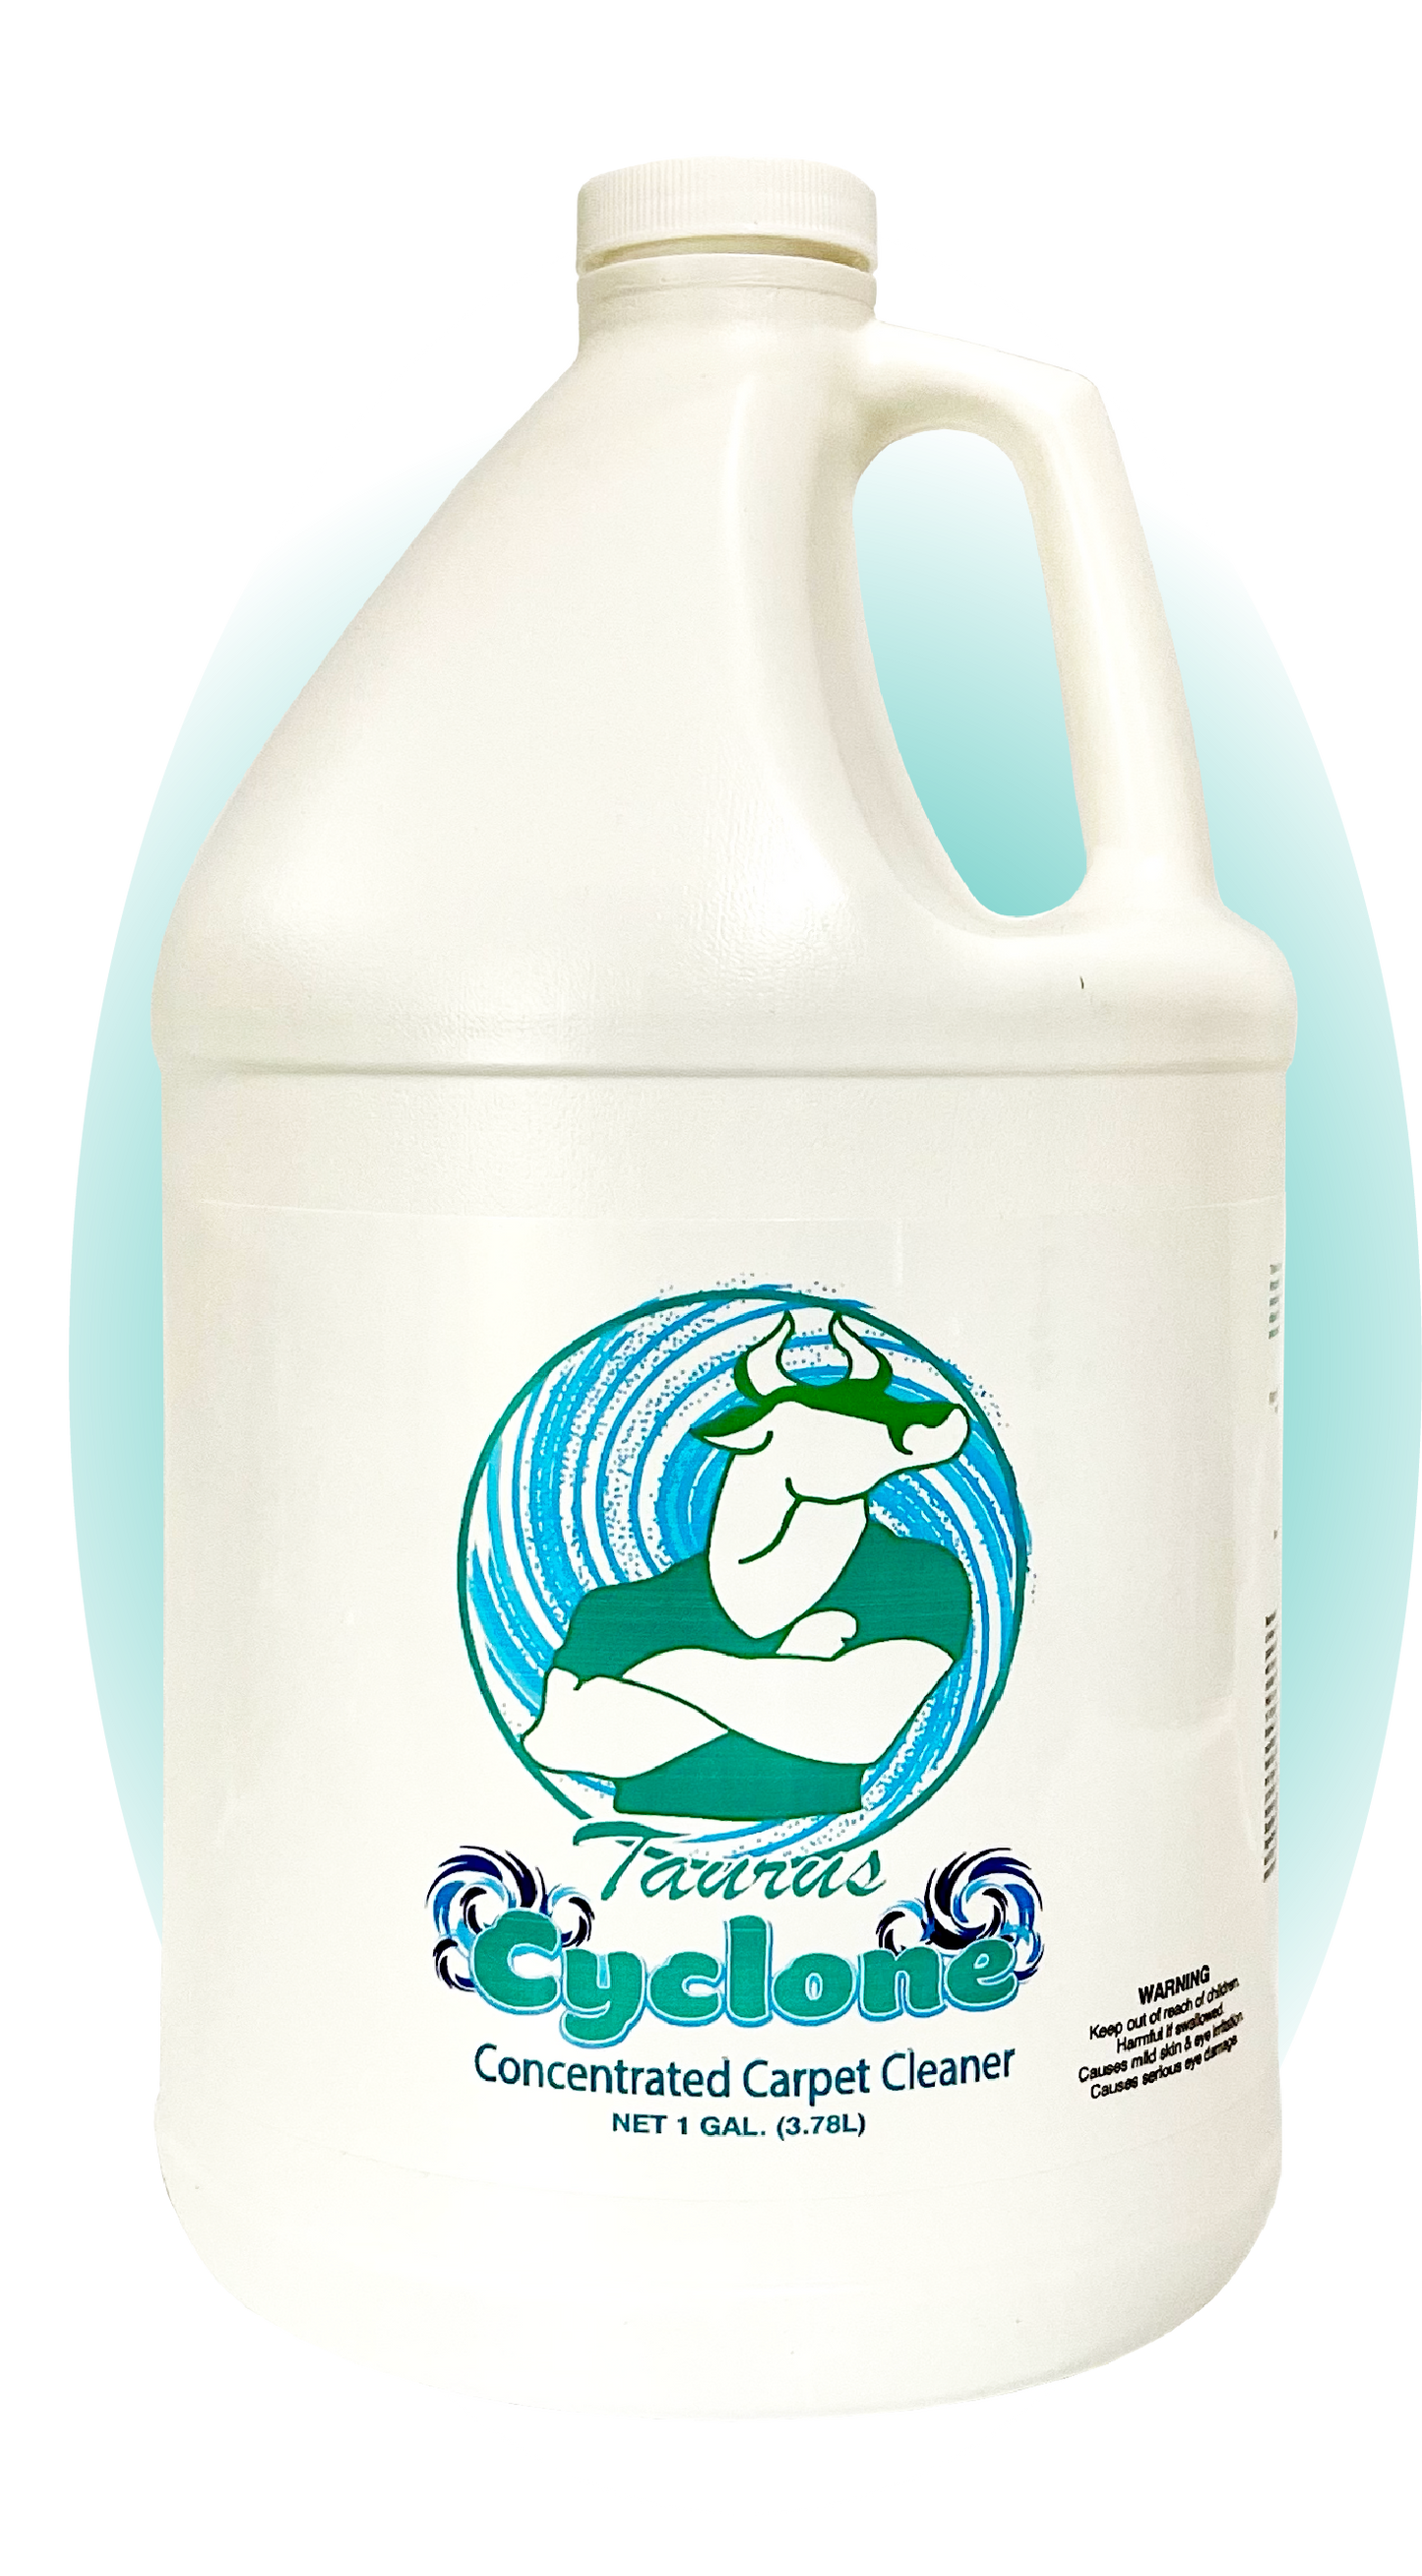 Taurus Cyclone Concentrated Carpet Cleaner